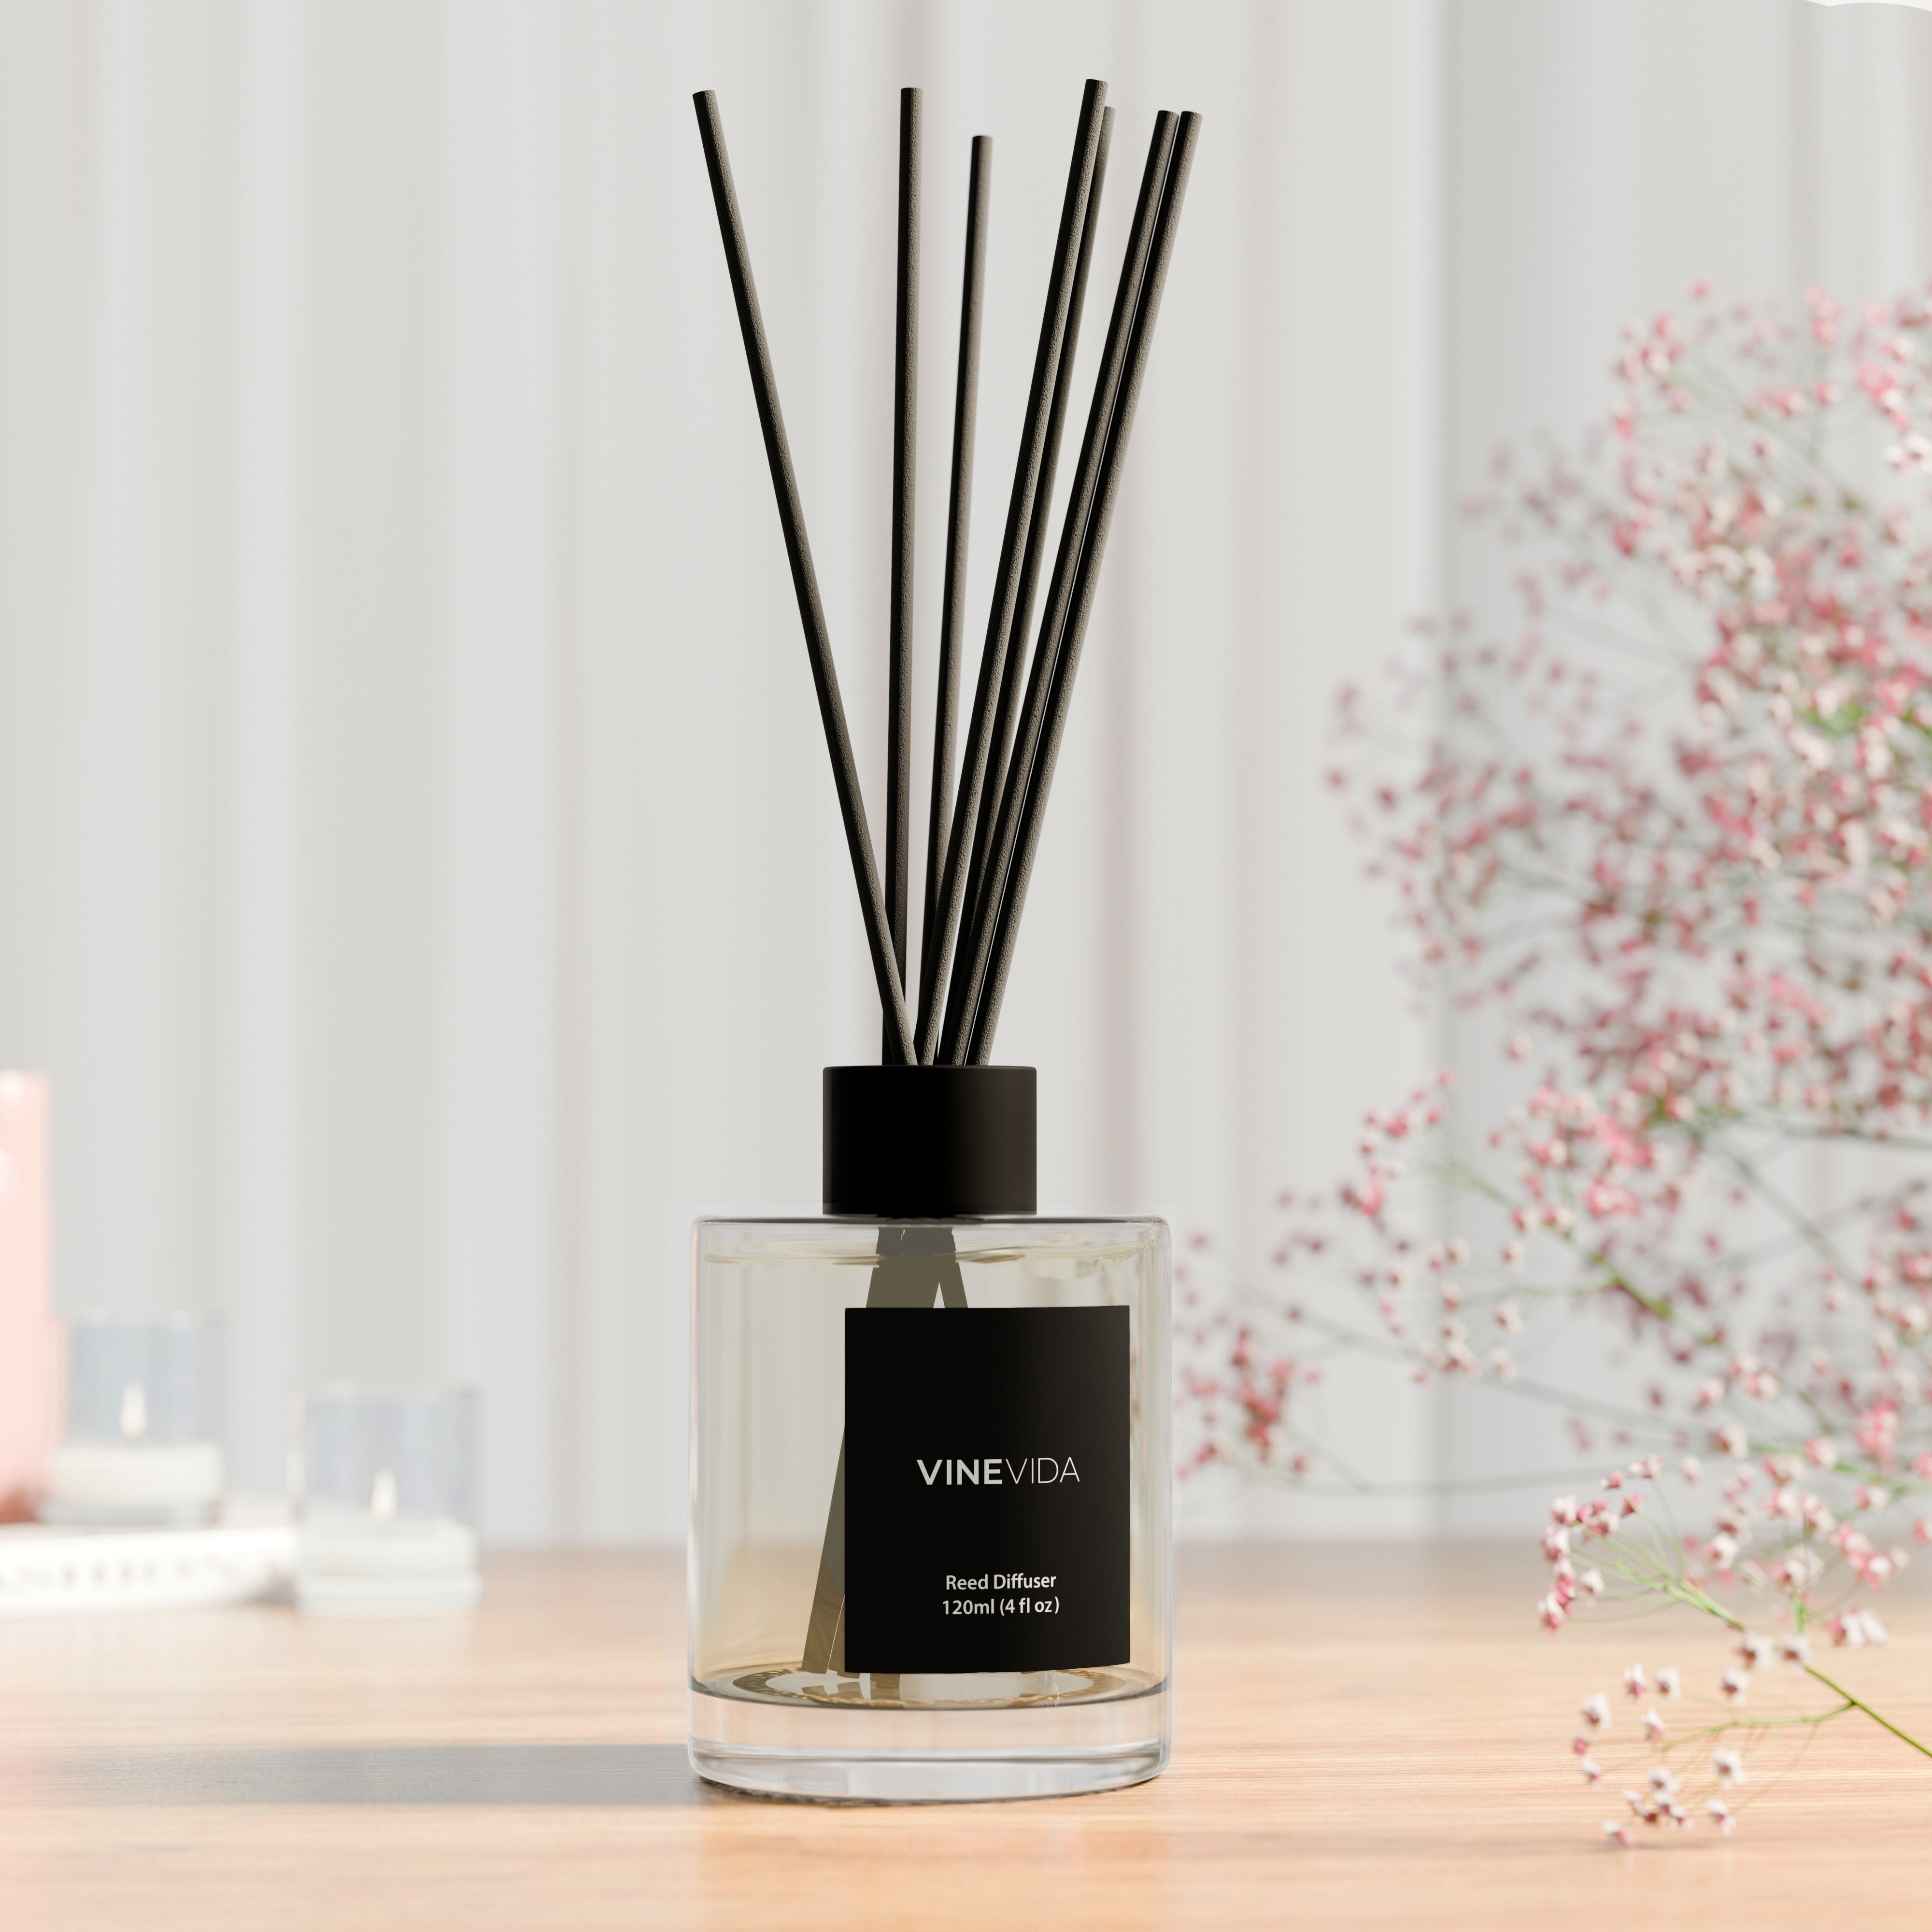 NO. 1116 Reed Diffuser - Inspired by: Marshmallow Fireside by Bath & Body Works